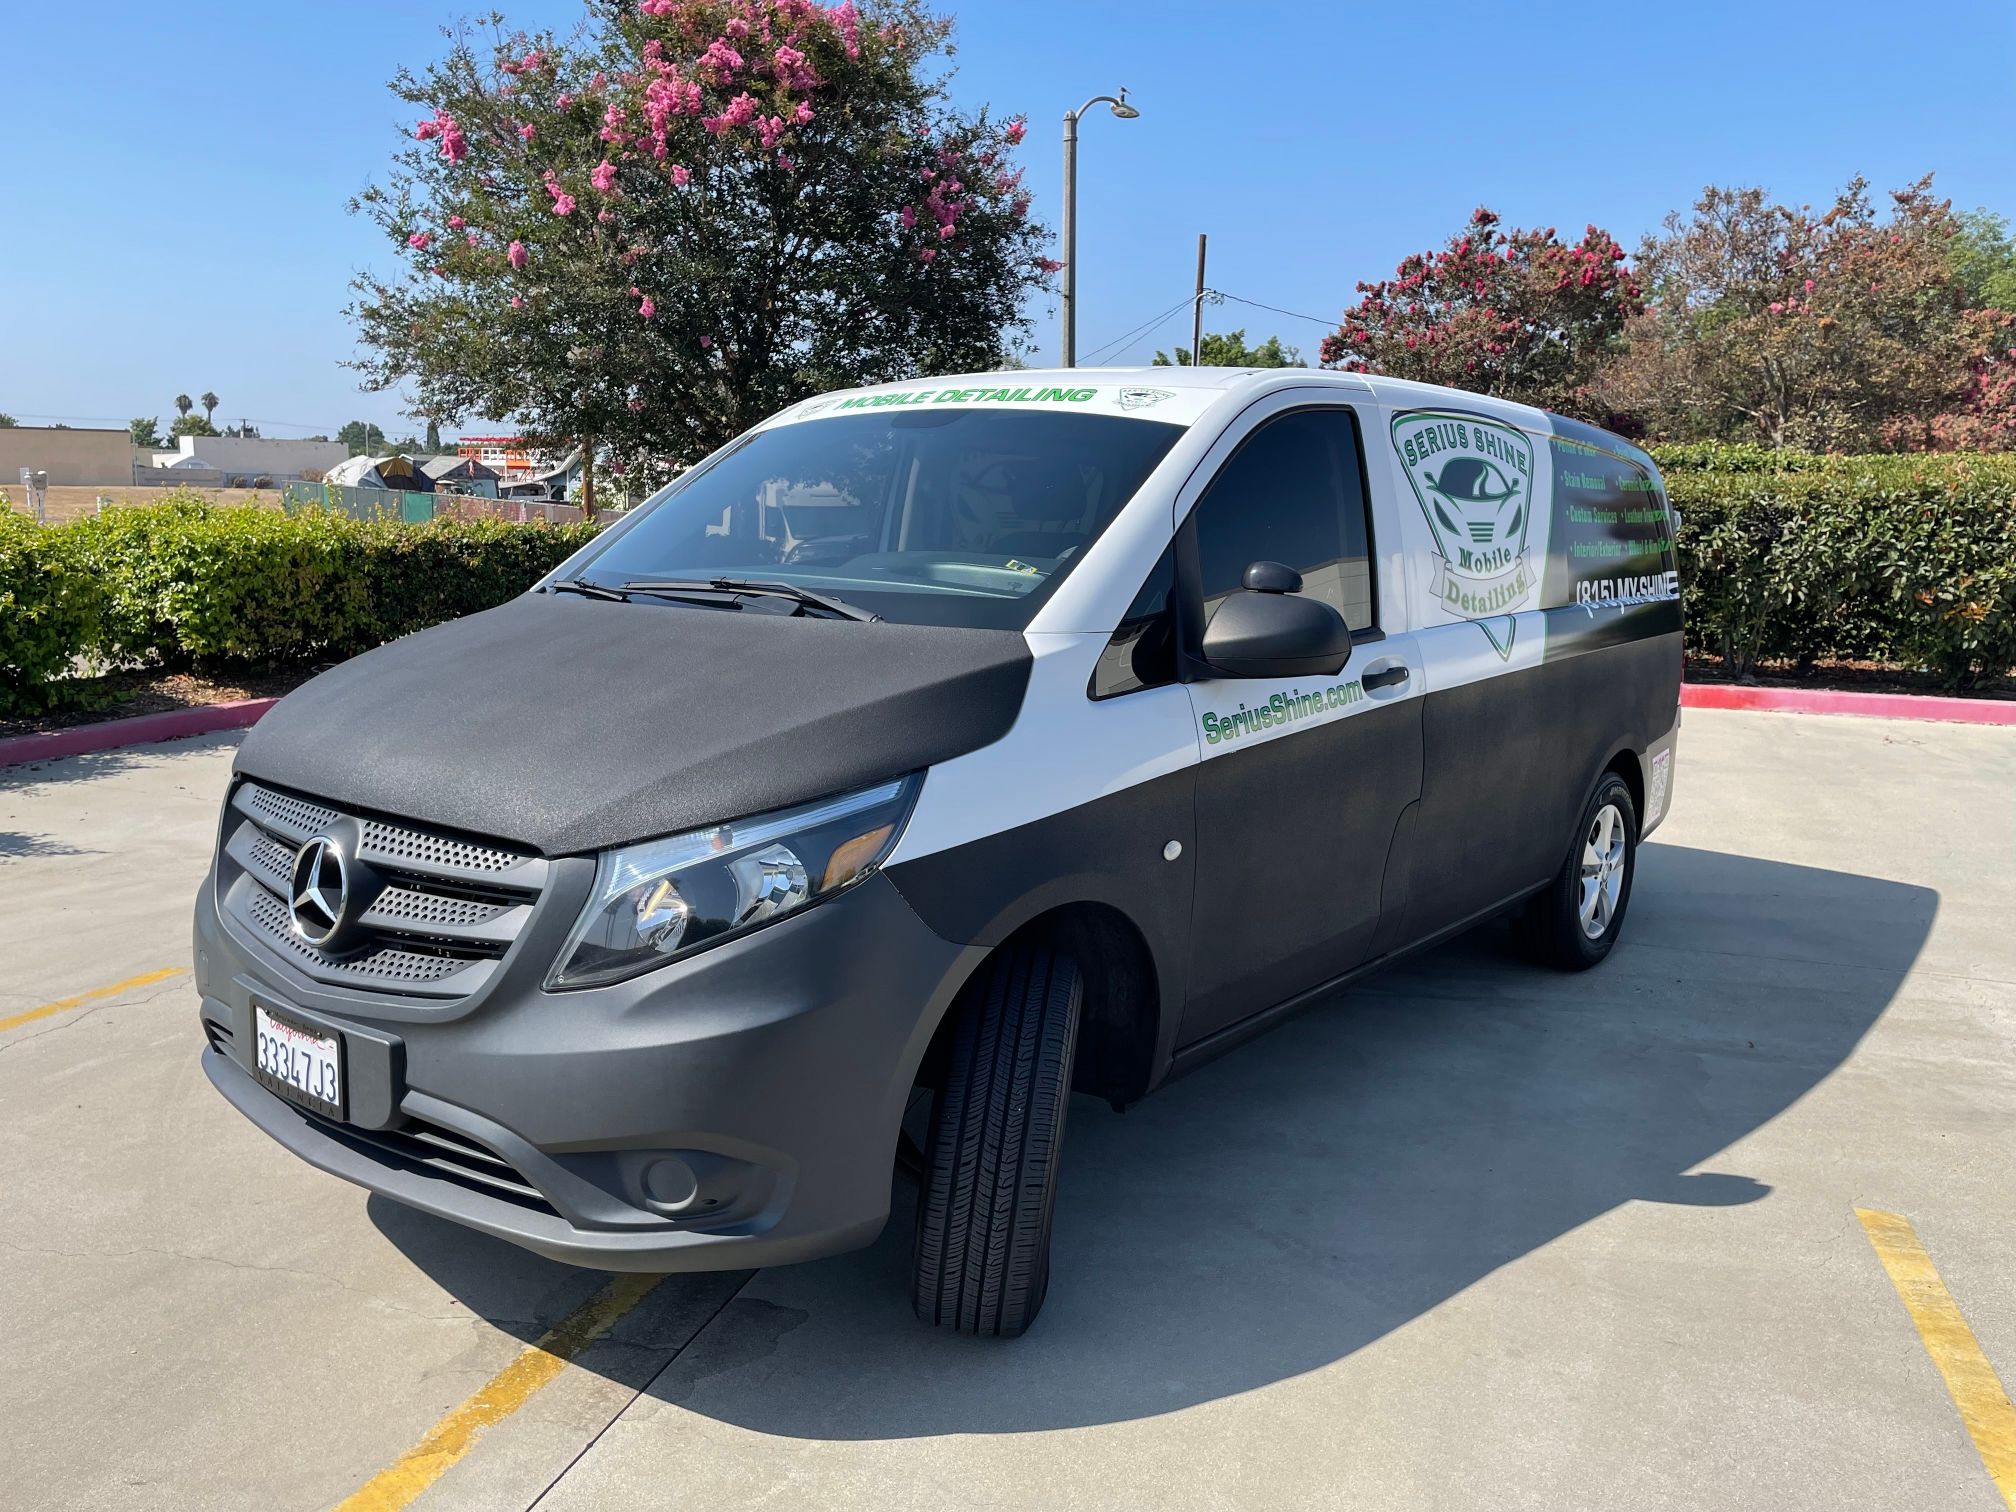 Partial Van Wraps Advertise for Your Business in Orange County California